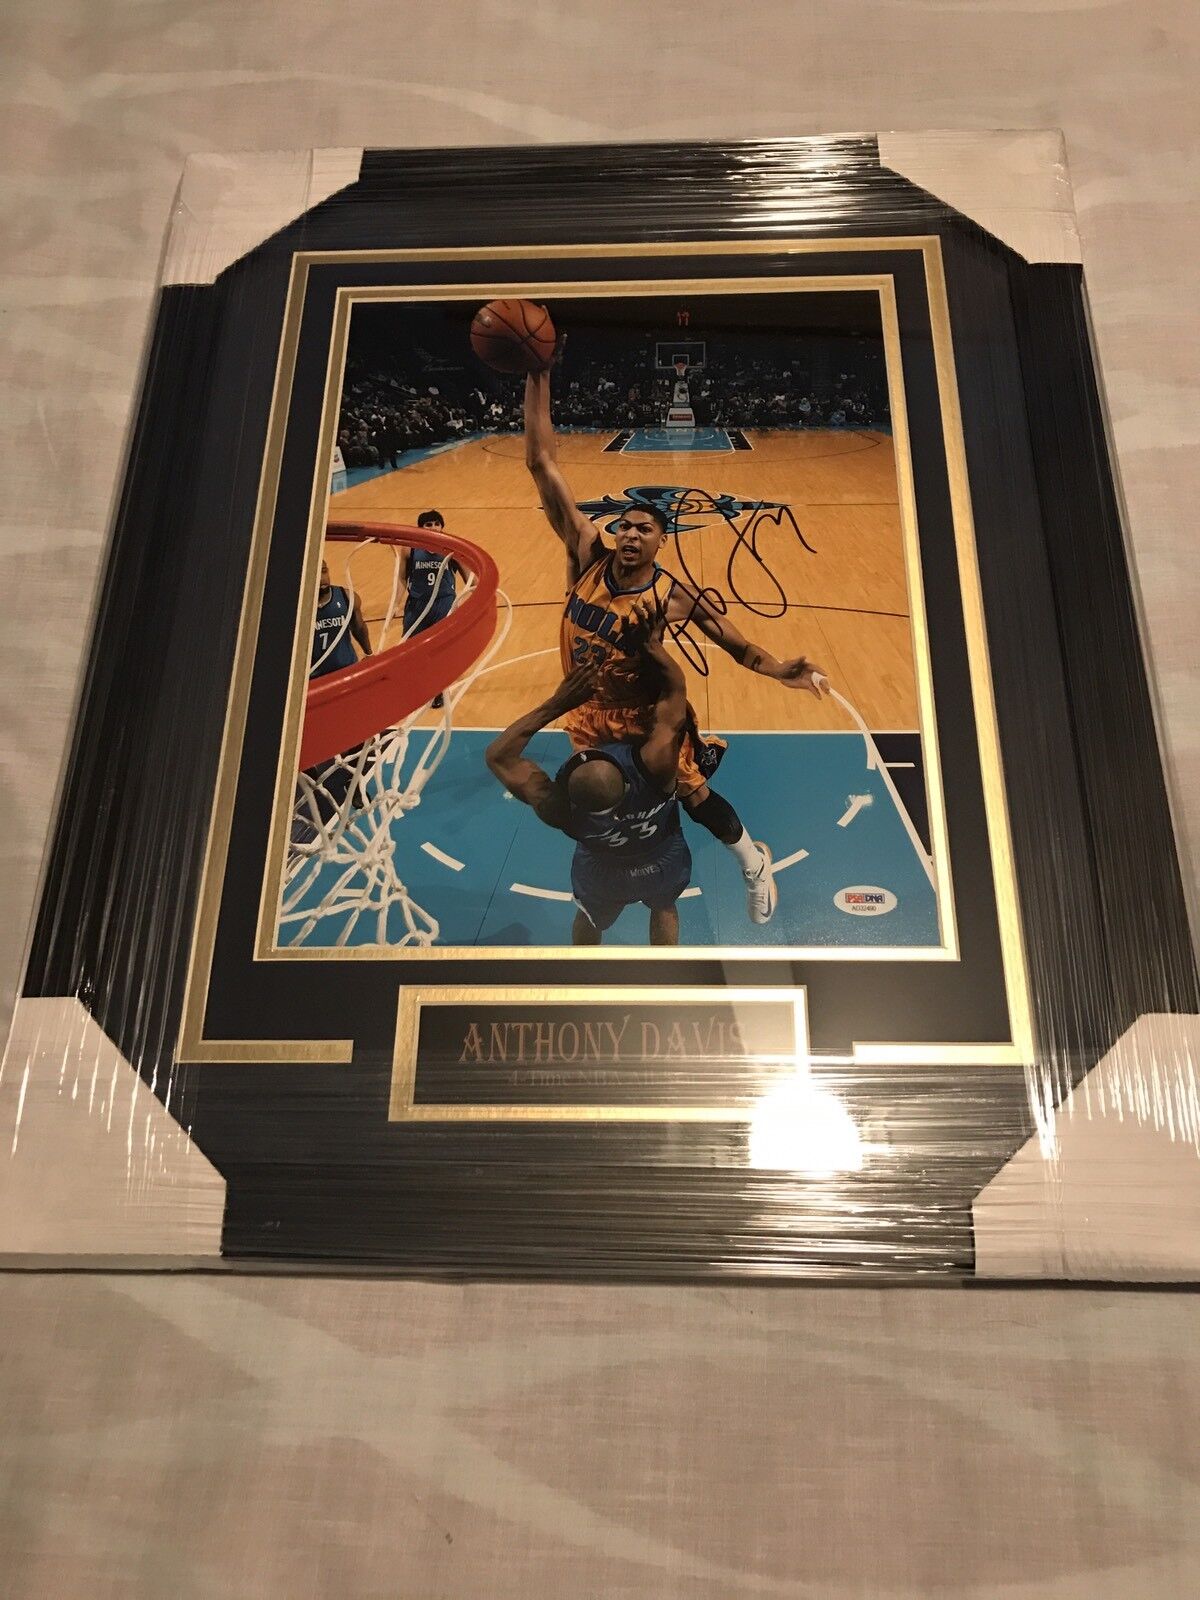 Anthony Davis Signed Auto New Orleans Pelicans Custom Framed 11x14 Photo Poster painting Psa/Dna